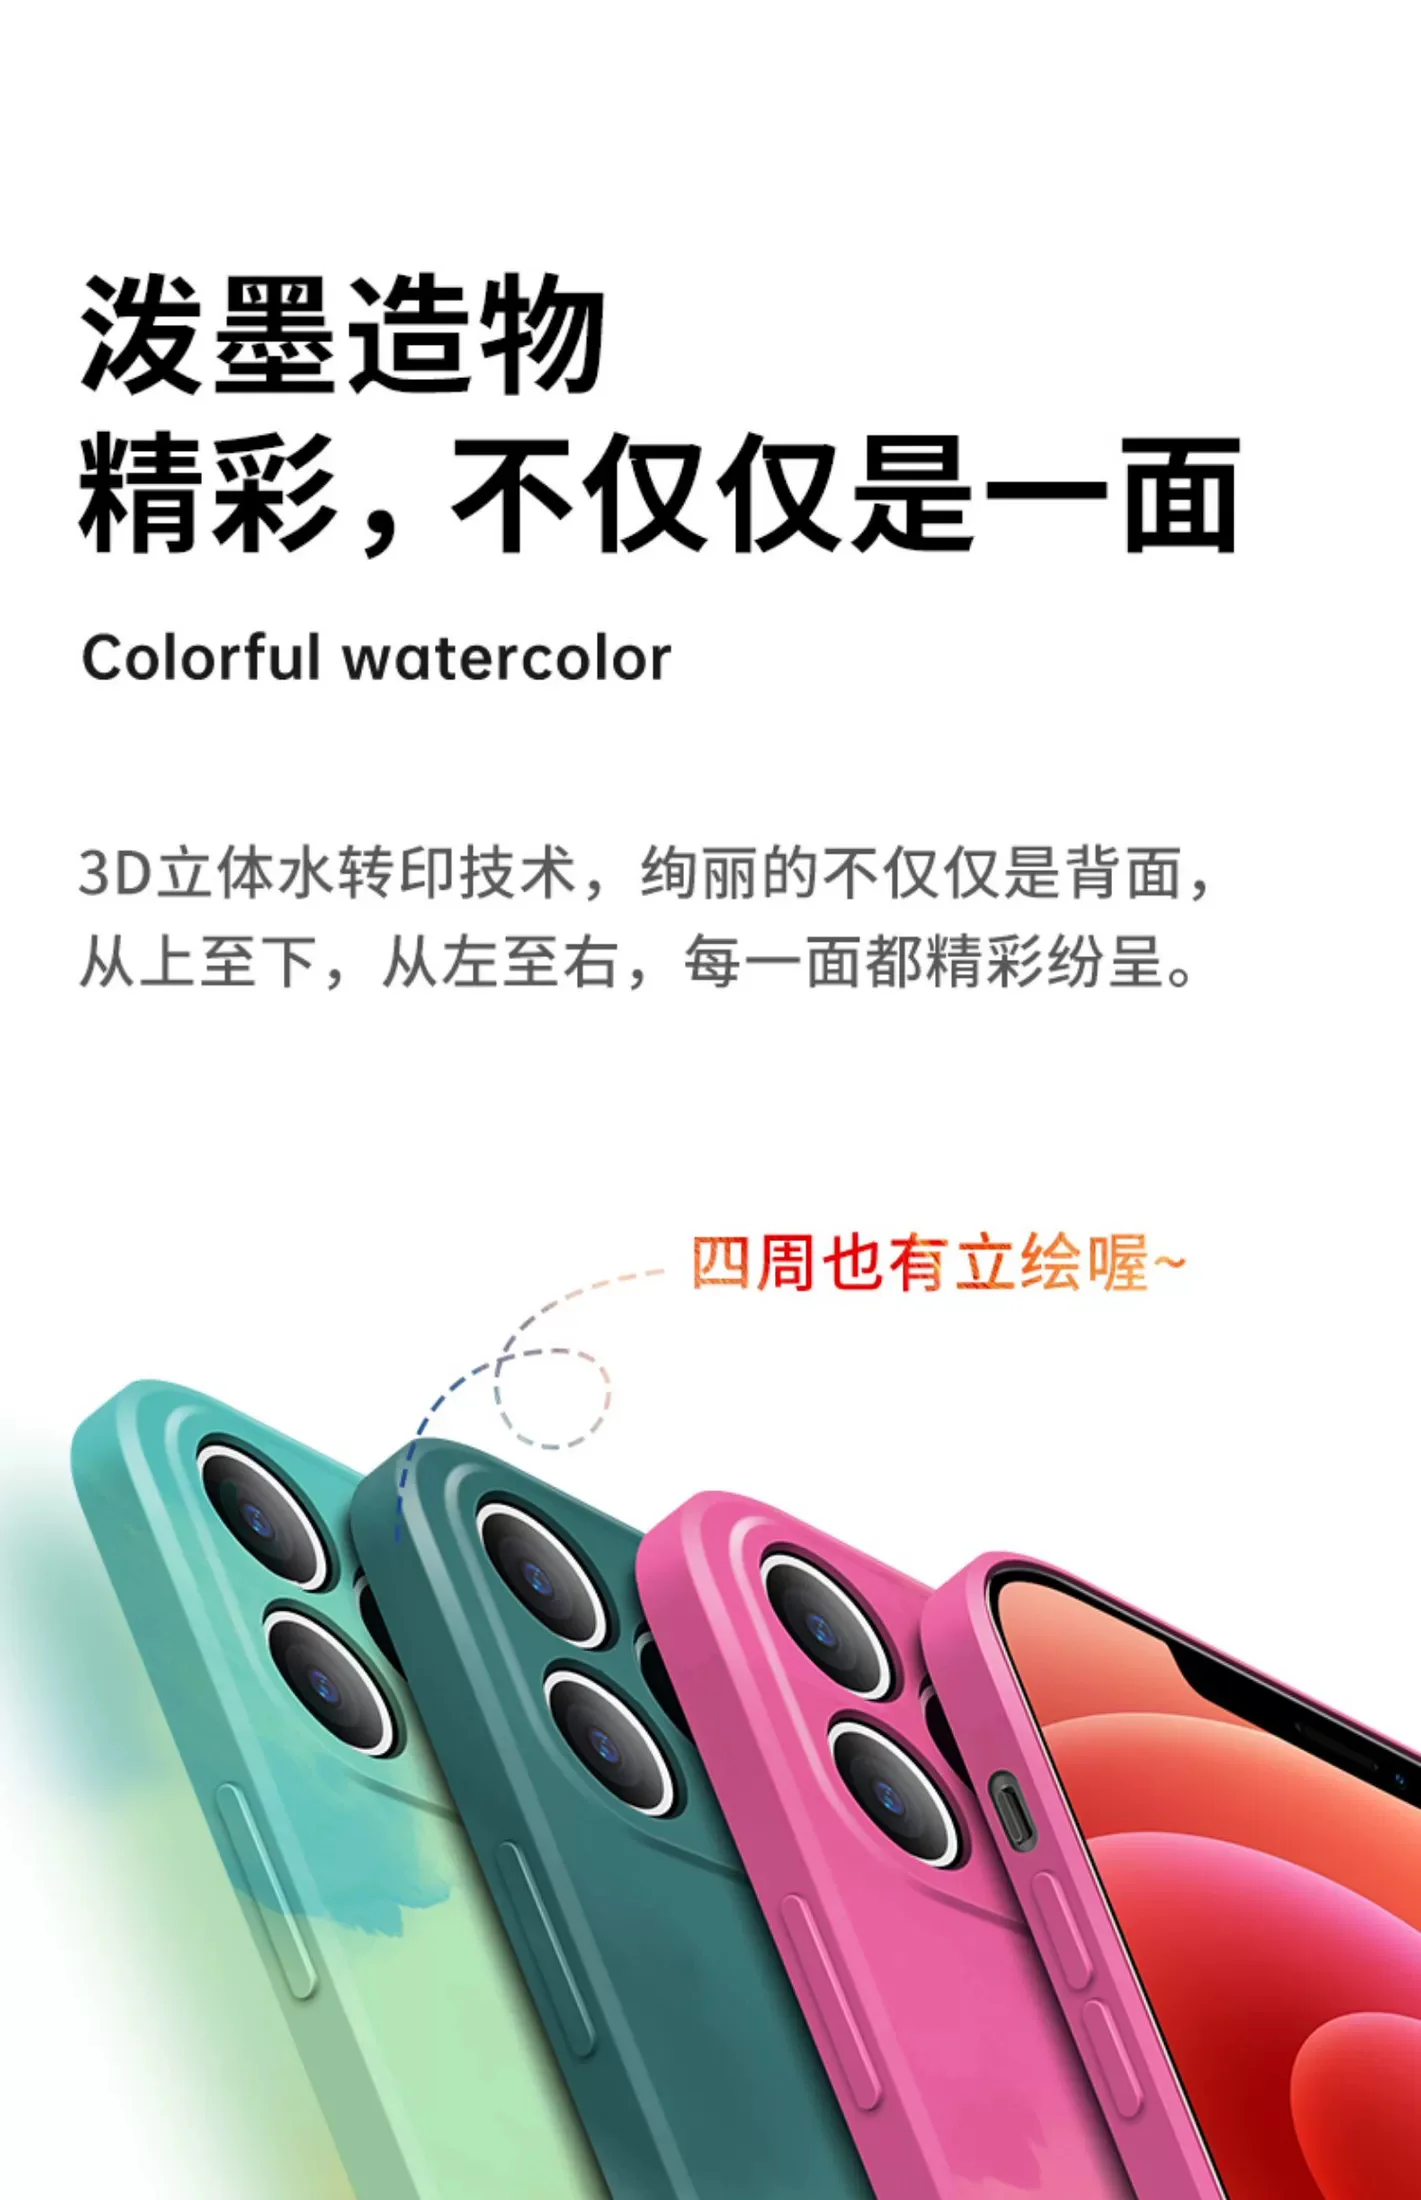 Official Original Silicone Case For iPhone 11 case For iPhone 12 pro mini XS Max XR X SE 2020 7 8 Plus 12 Pro Max case Cover